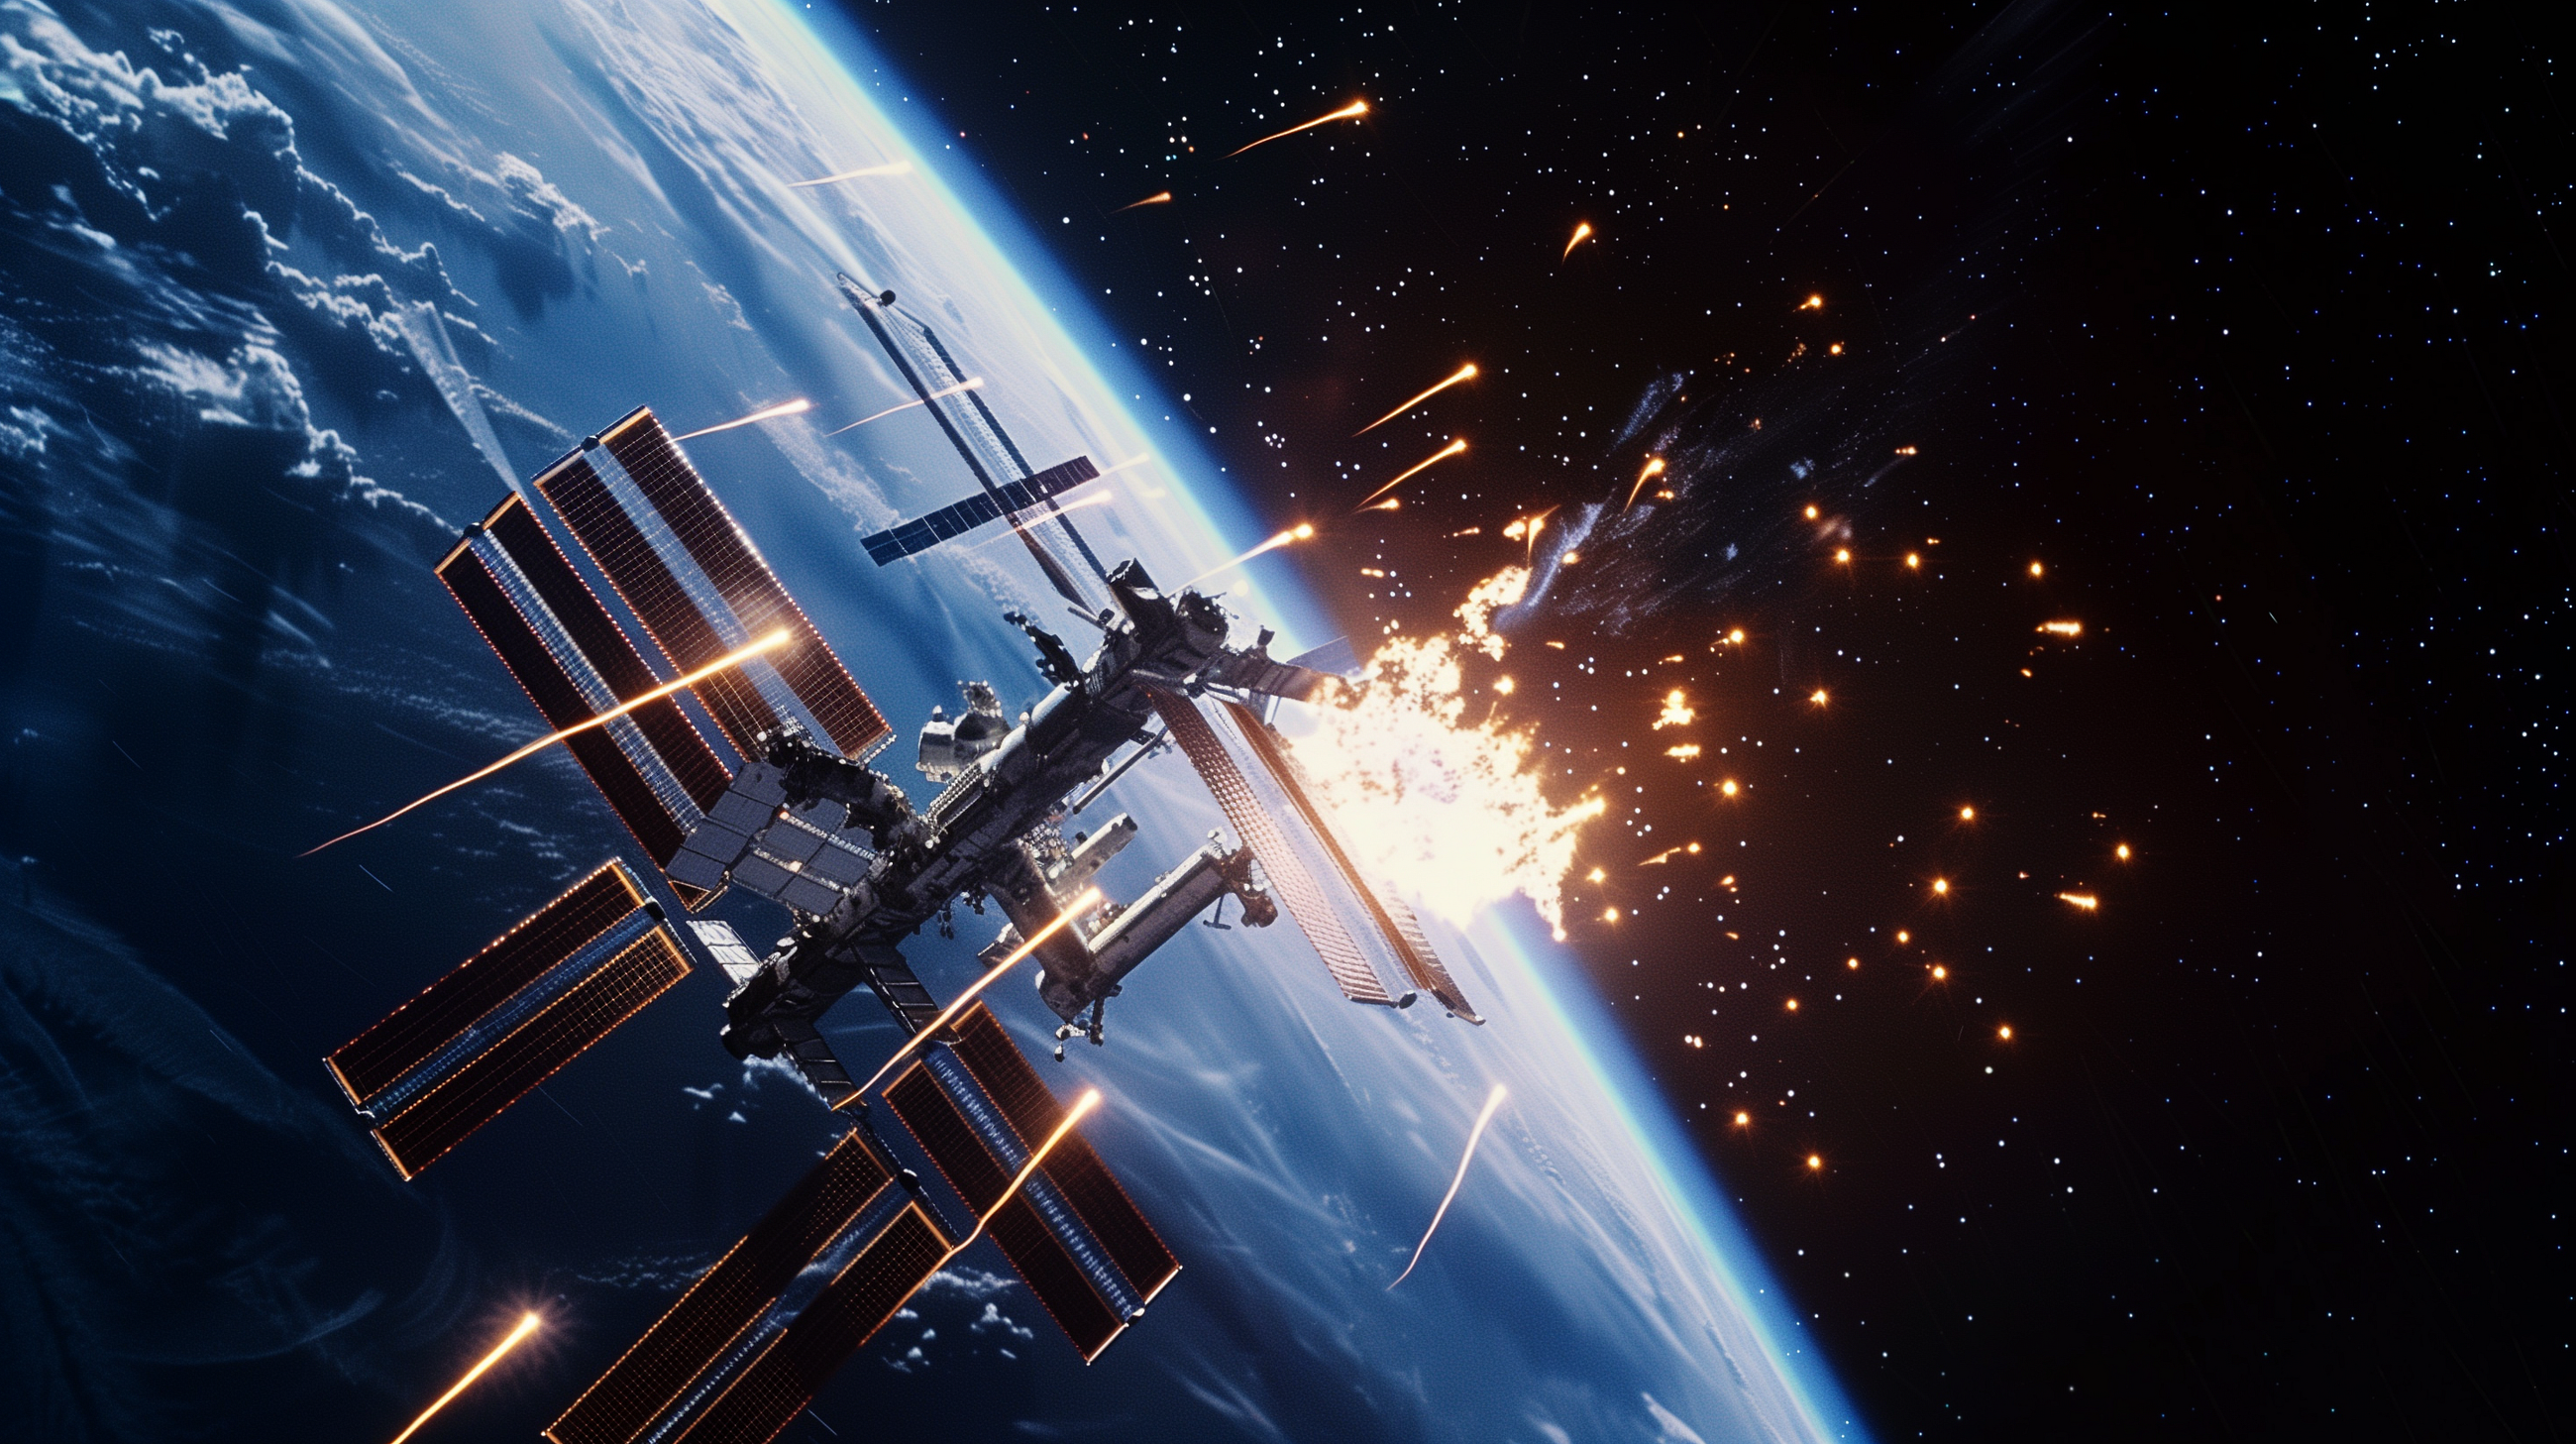 By 2031 The International Space Station is Deorbited: Dawn of the Comm